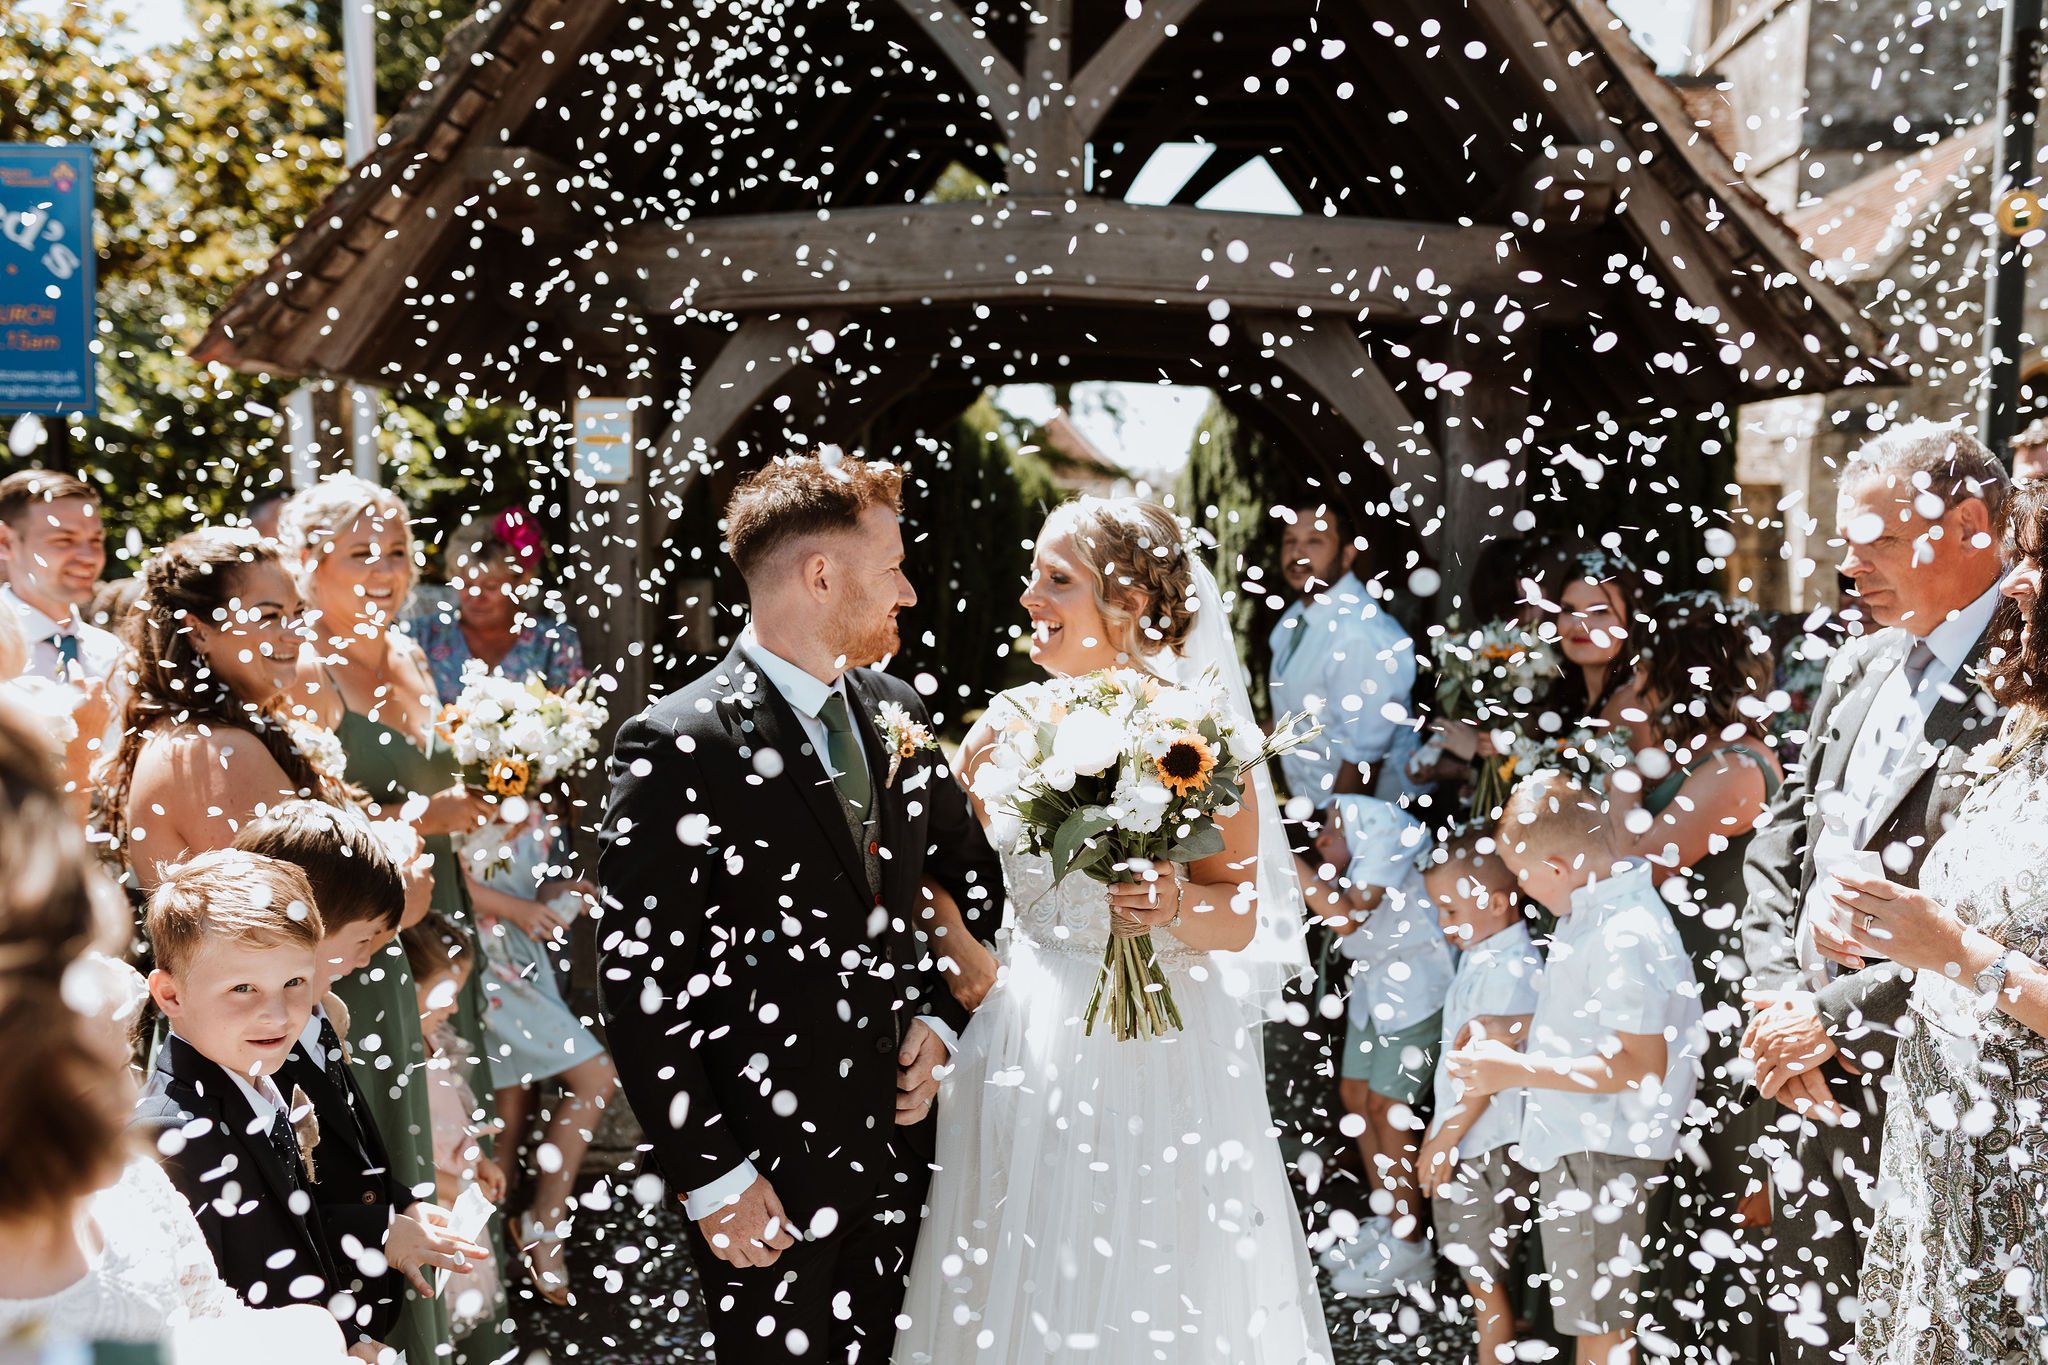  Bride and groom are looking at each other after leaving the church with their wedding guests on either side throwing white confetti over them. The groom is wearing a dark suit with a tweed waistcoat, white shirt and green tie.  The bride is wearing 